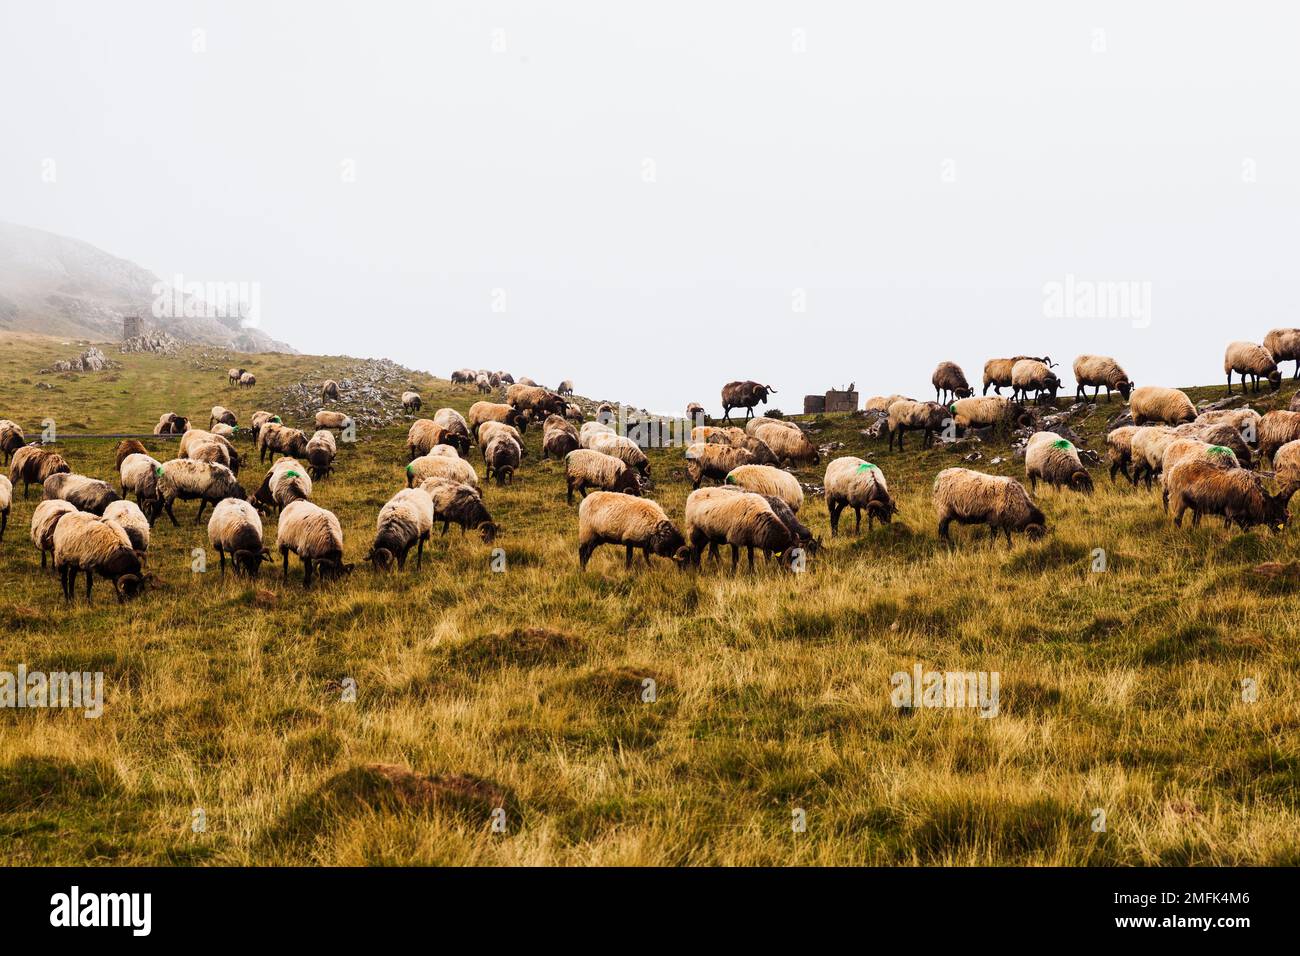 The mixed flock of sheep and goats grazing on meadow along the Camino de Santiago in the French Pyrenees Stock Photo